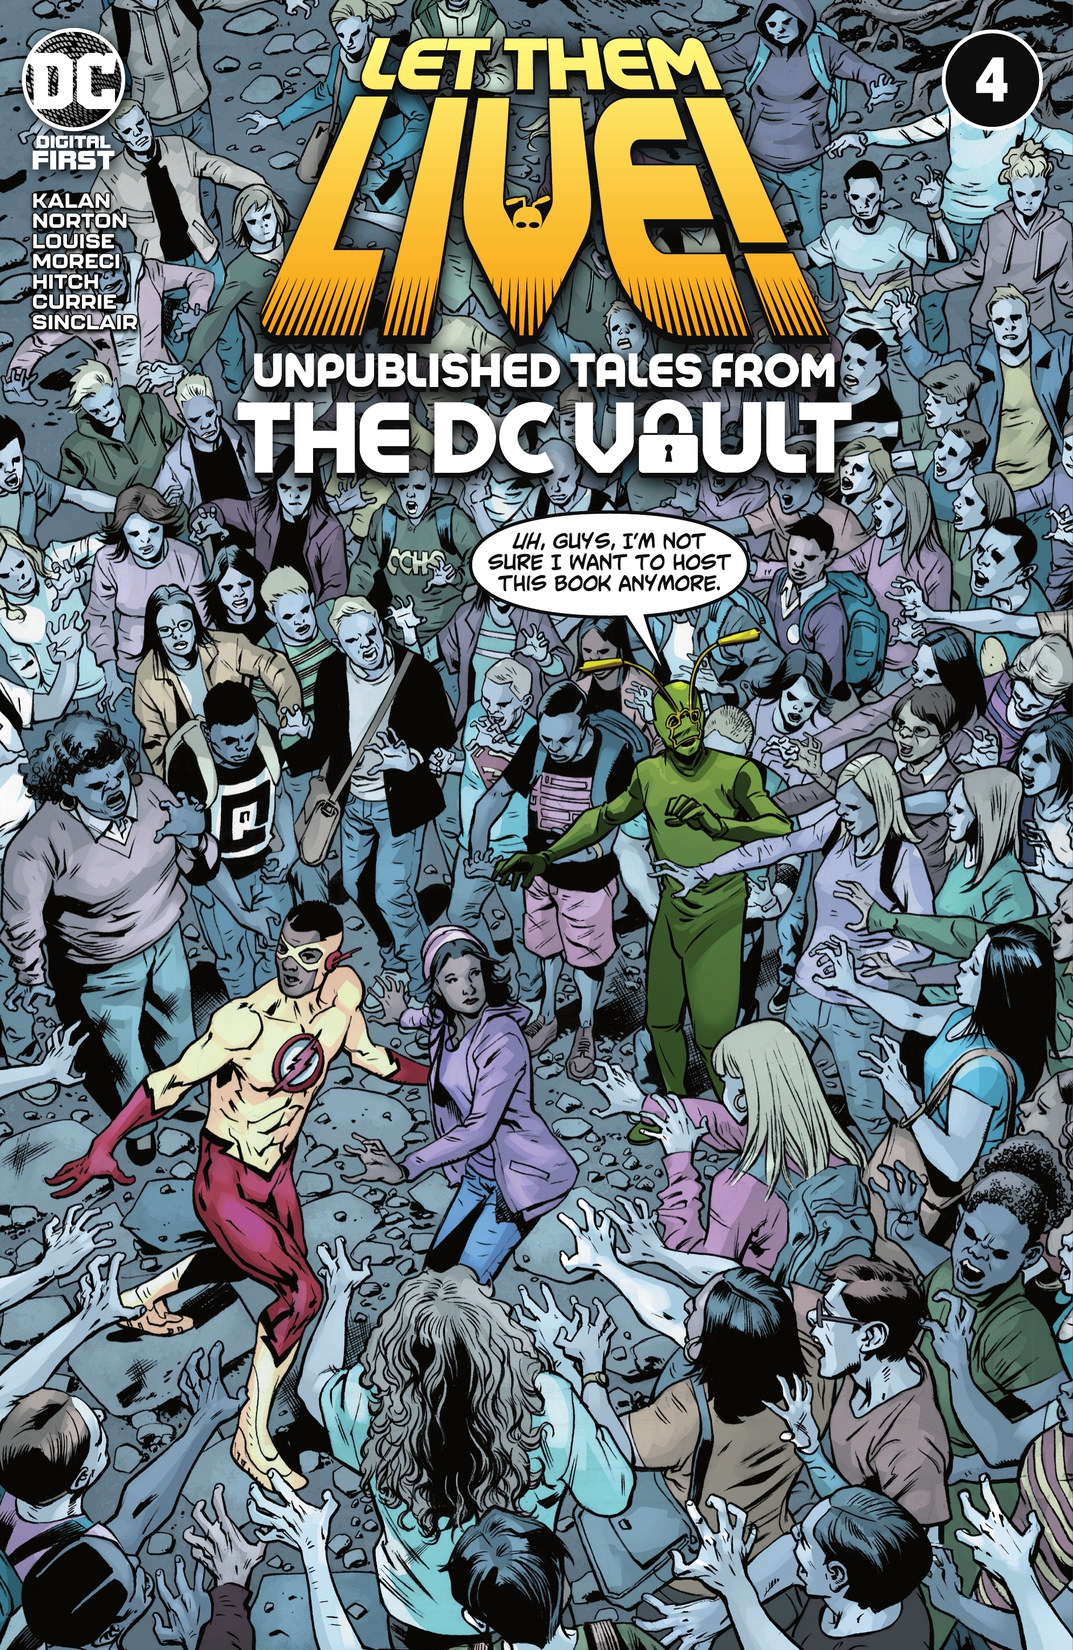 Let Them Live!: Unpublished Tales from the DC Vault #4 preview images